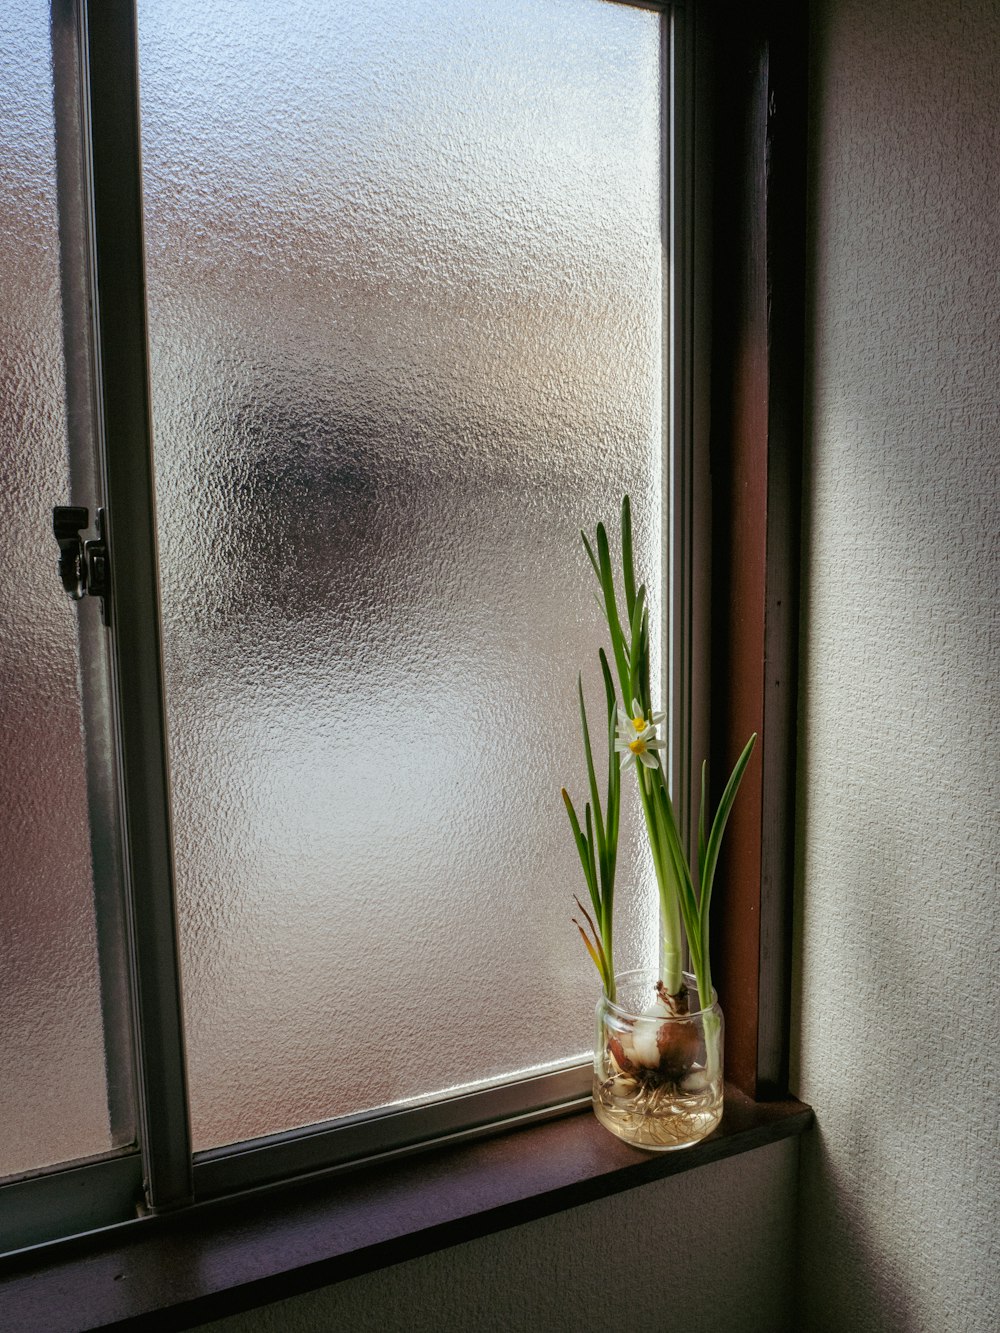 a plant in a vase on a window sill